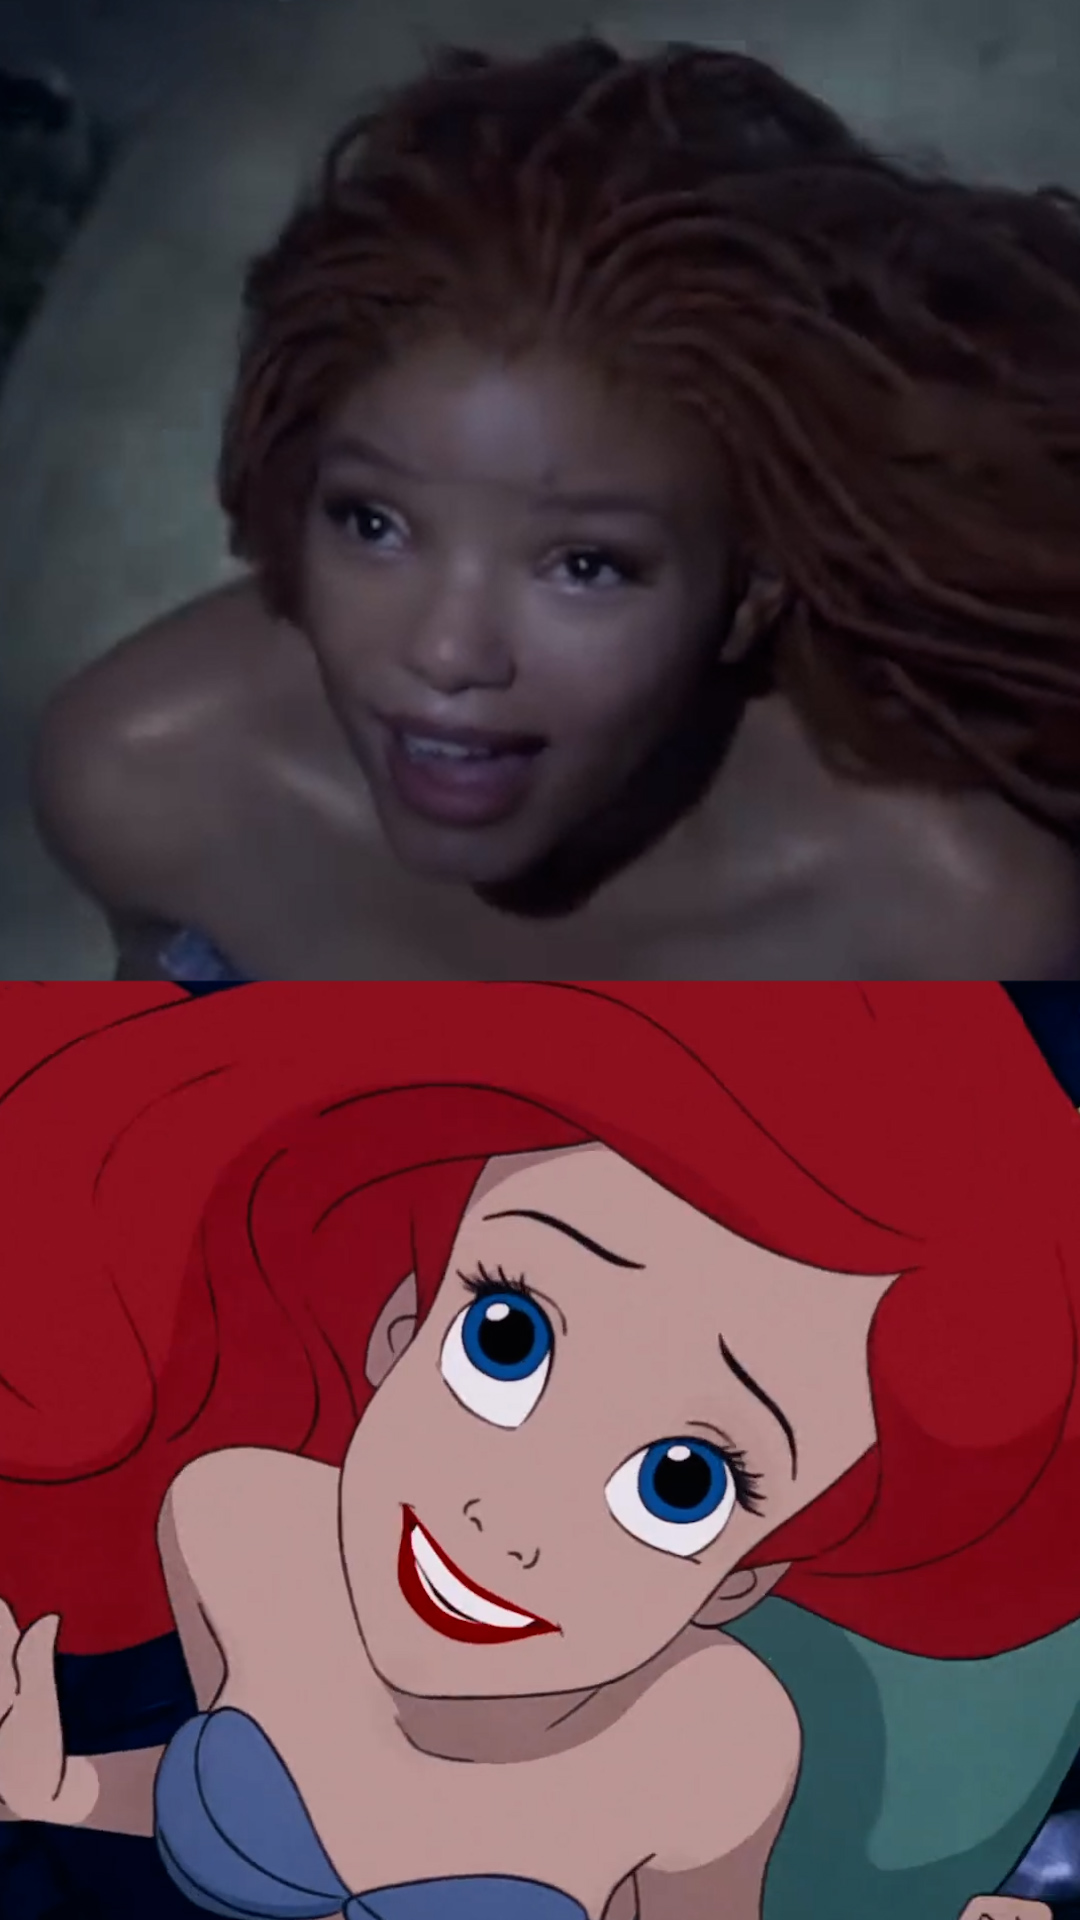 She's brown like me!': Girls react to seeing a Black Ariel